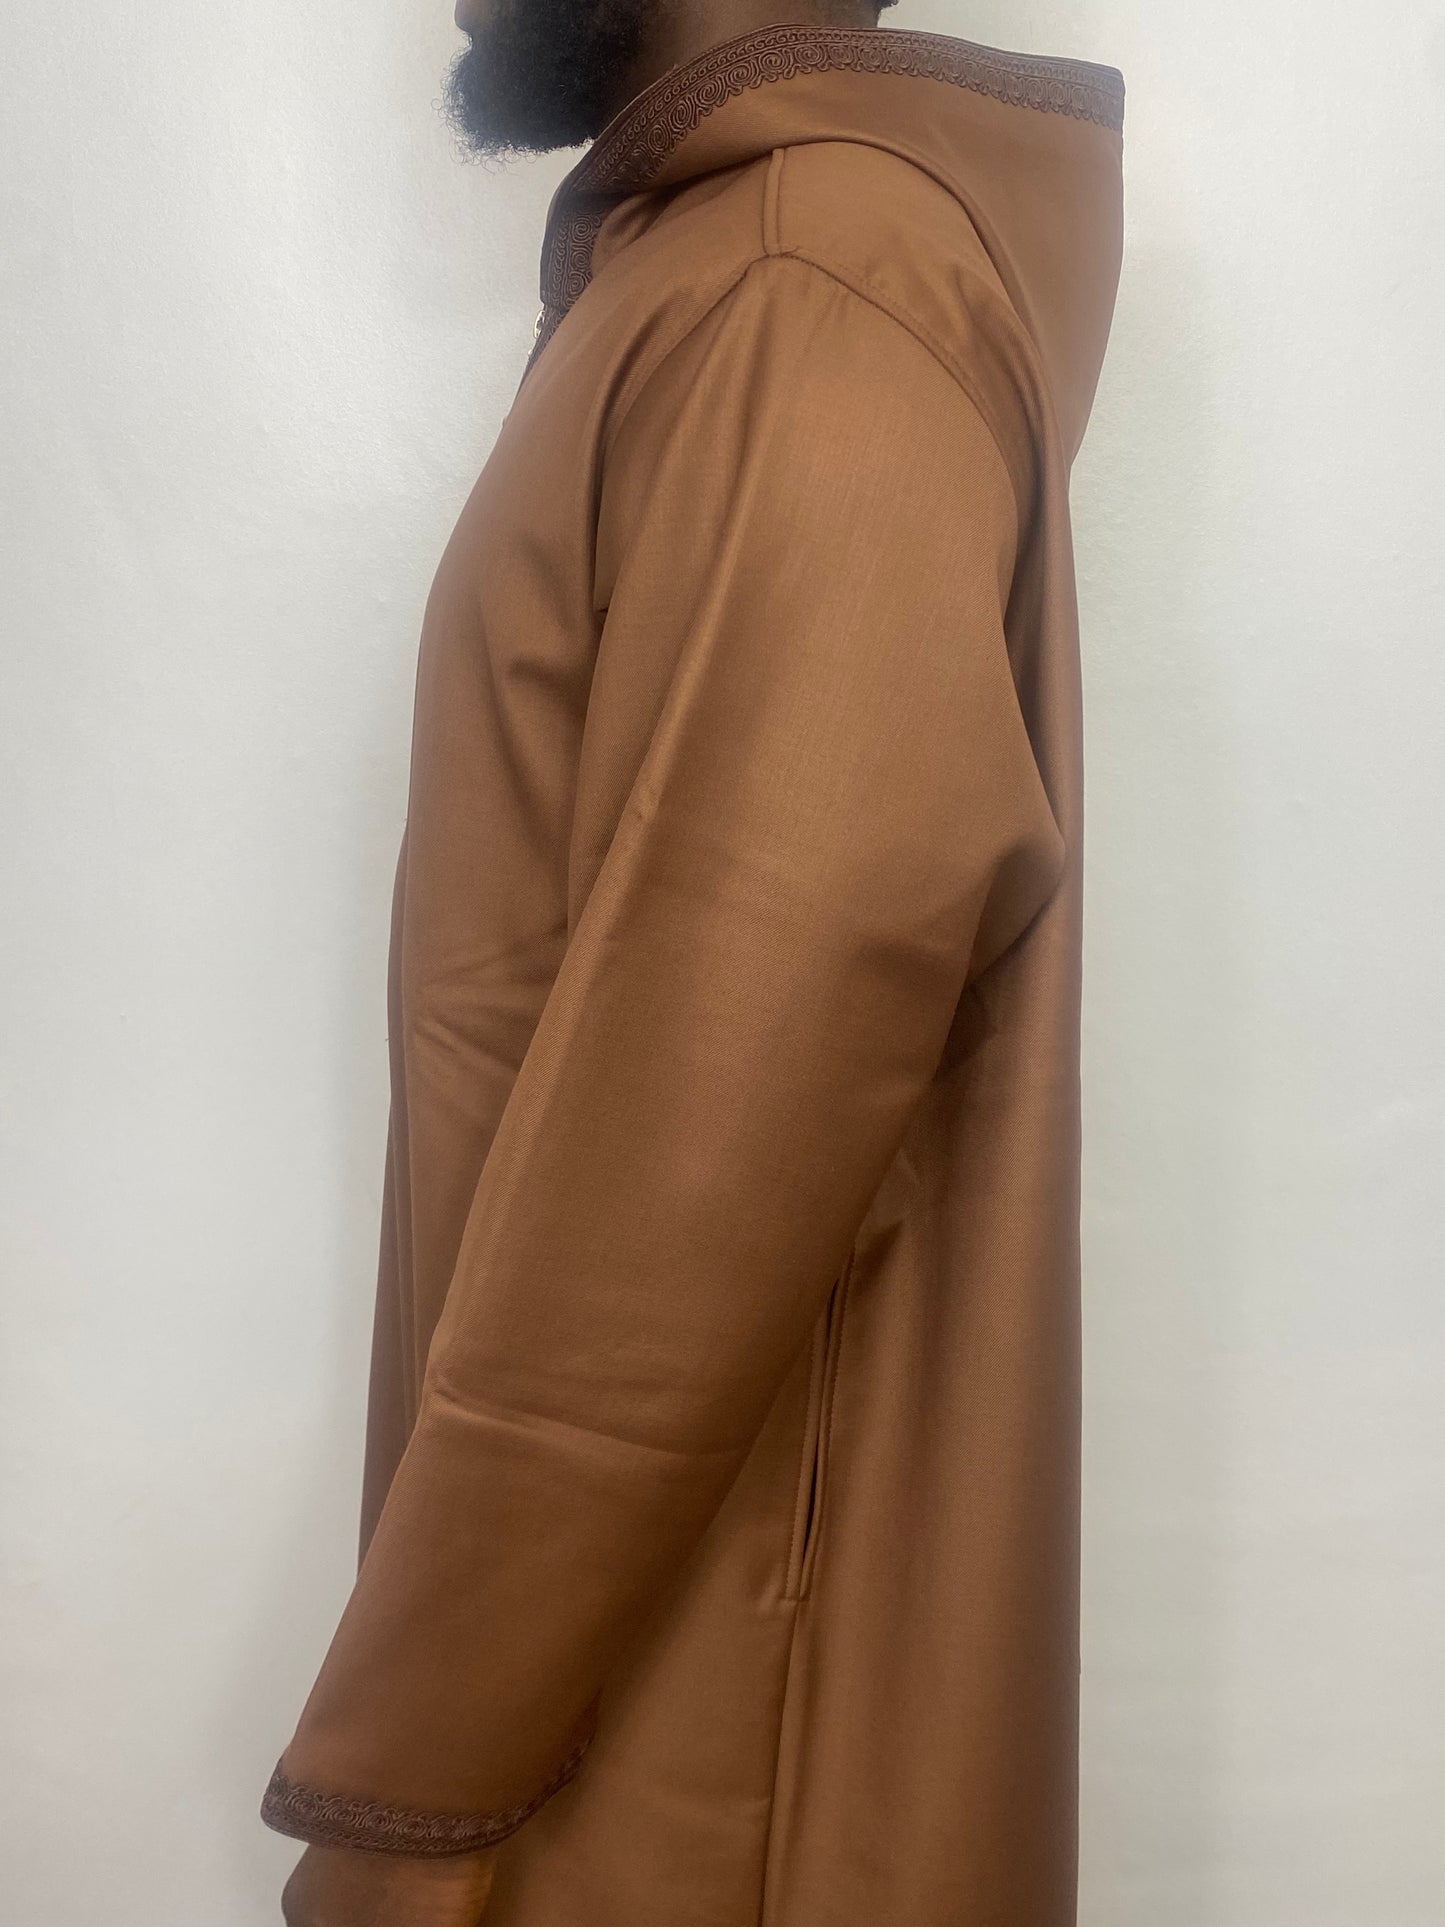 Sepia Brown - Hooded